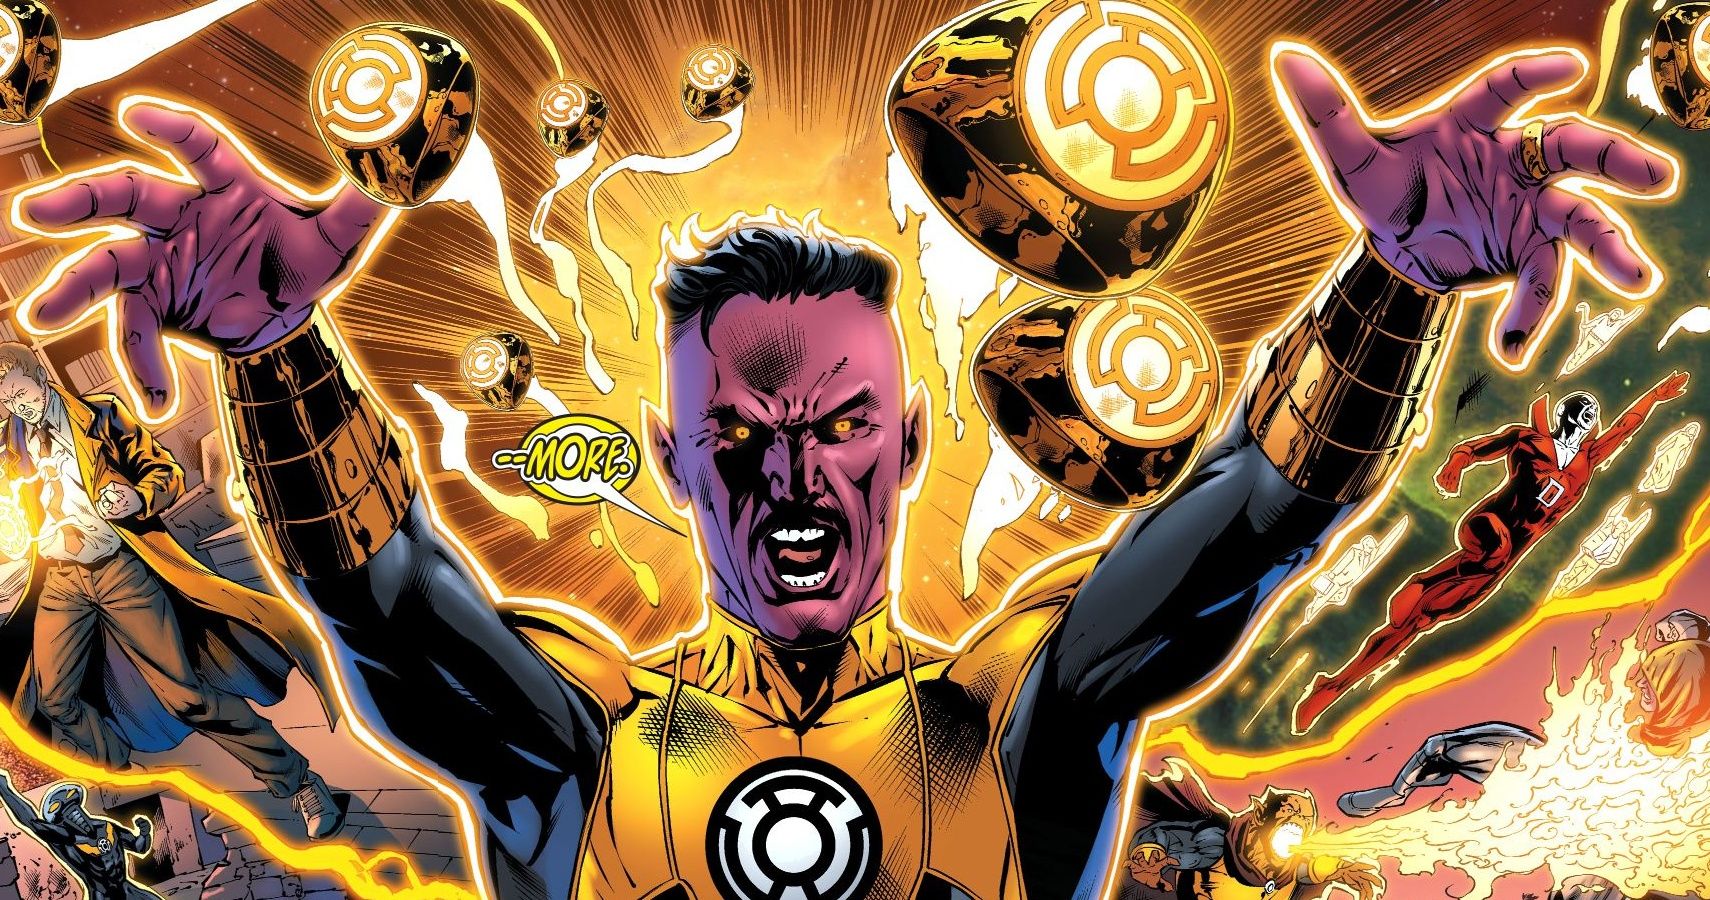 Sinestro | 5 Villains We'd Love To See In The DCEU | Popcorn Banter